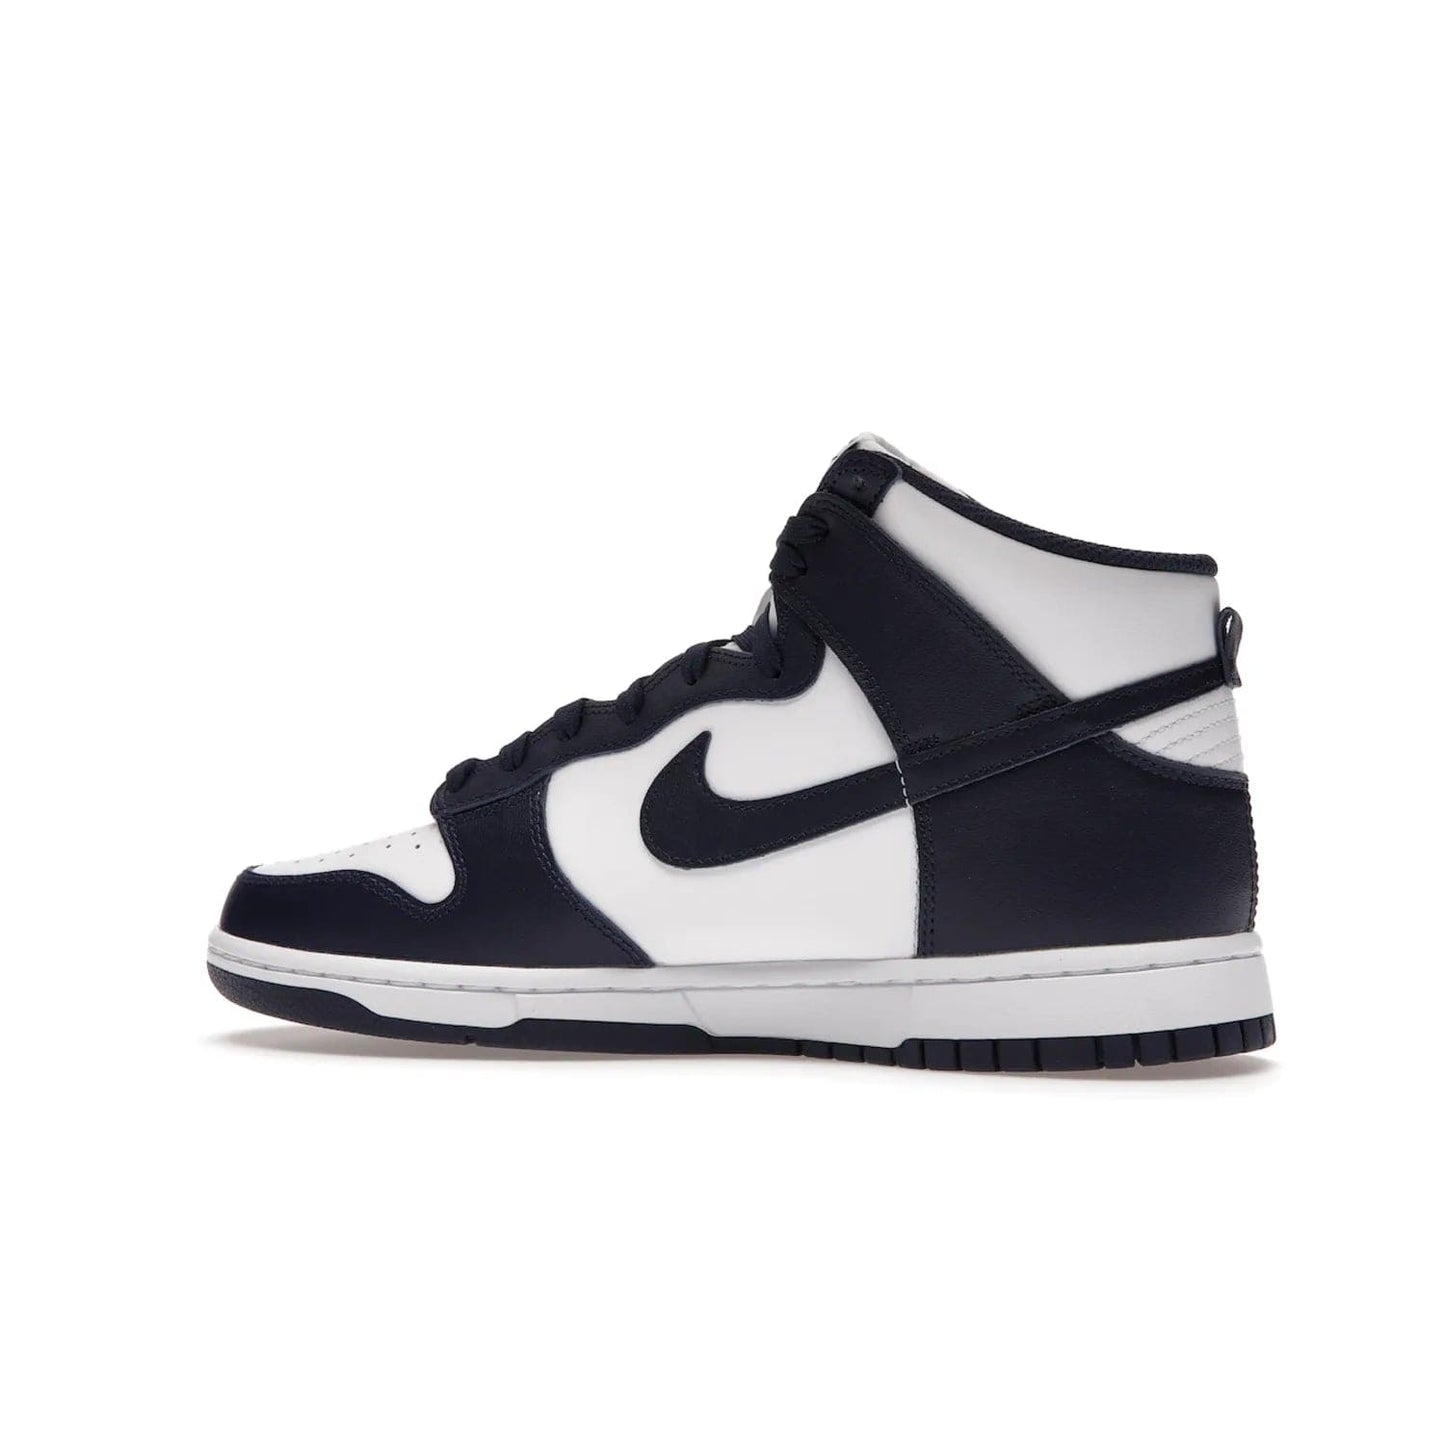 Nike Dunk High Championship Navy - Image 21 - Only at www.BallersClubKickz.com - Classic athletic style meets striking color-blocking on the Nike Dunk High Championship Navy. A white leather upper with Championship Navy overlays creates a retro look with a woven tongue label and sole. Unleash your inner champion with the Nike Dunk High Championship Navy.